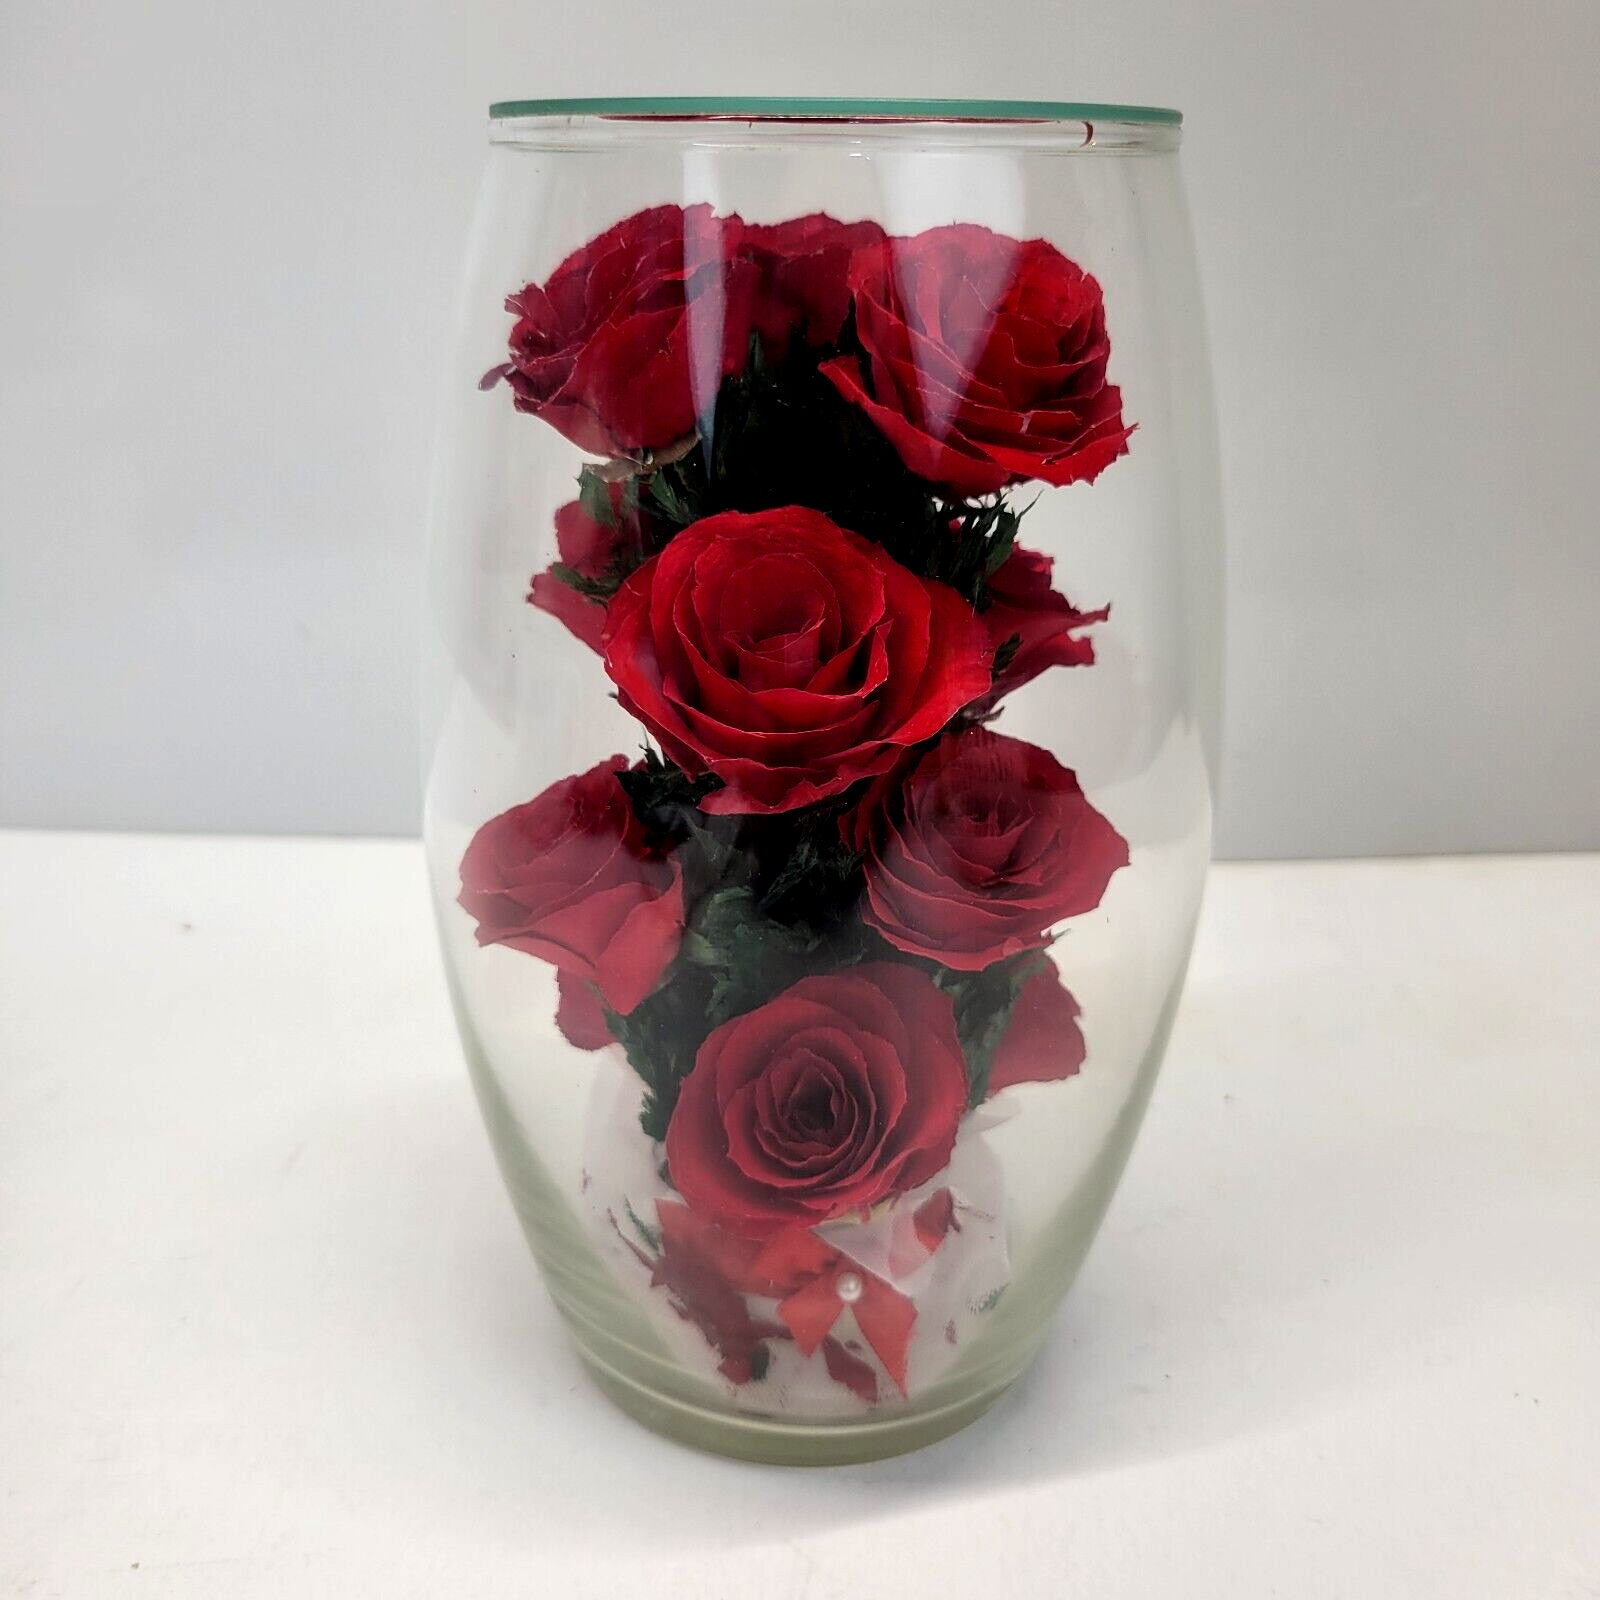 Danbury Mint Miracle Roses Bouquet Everlasting Roses In Glass Vase Without Base - $47.97